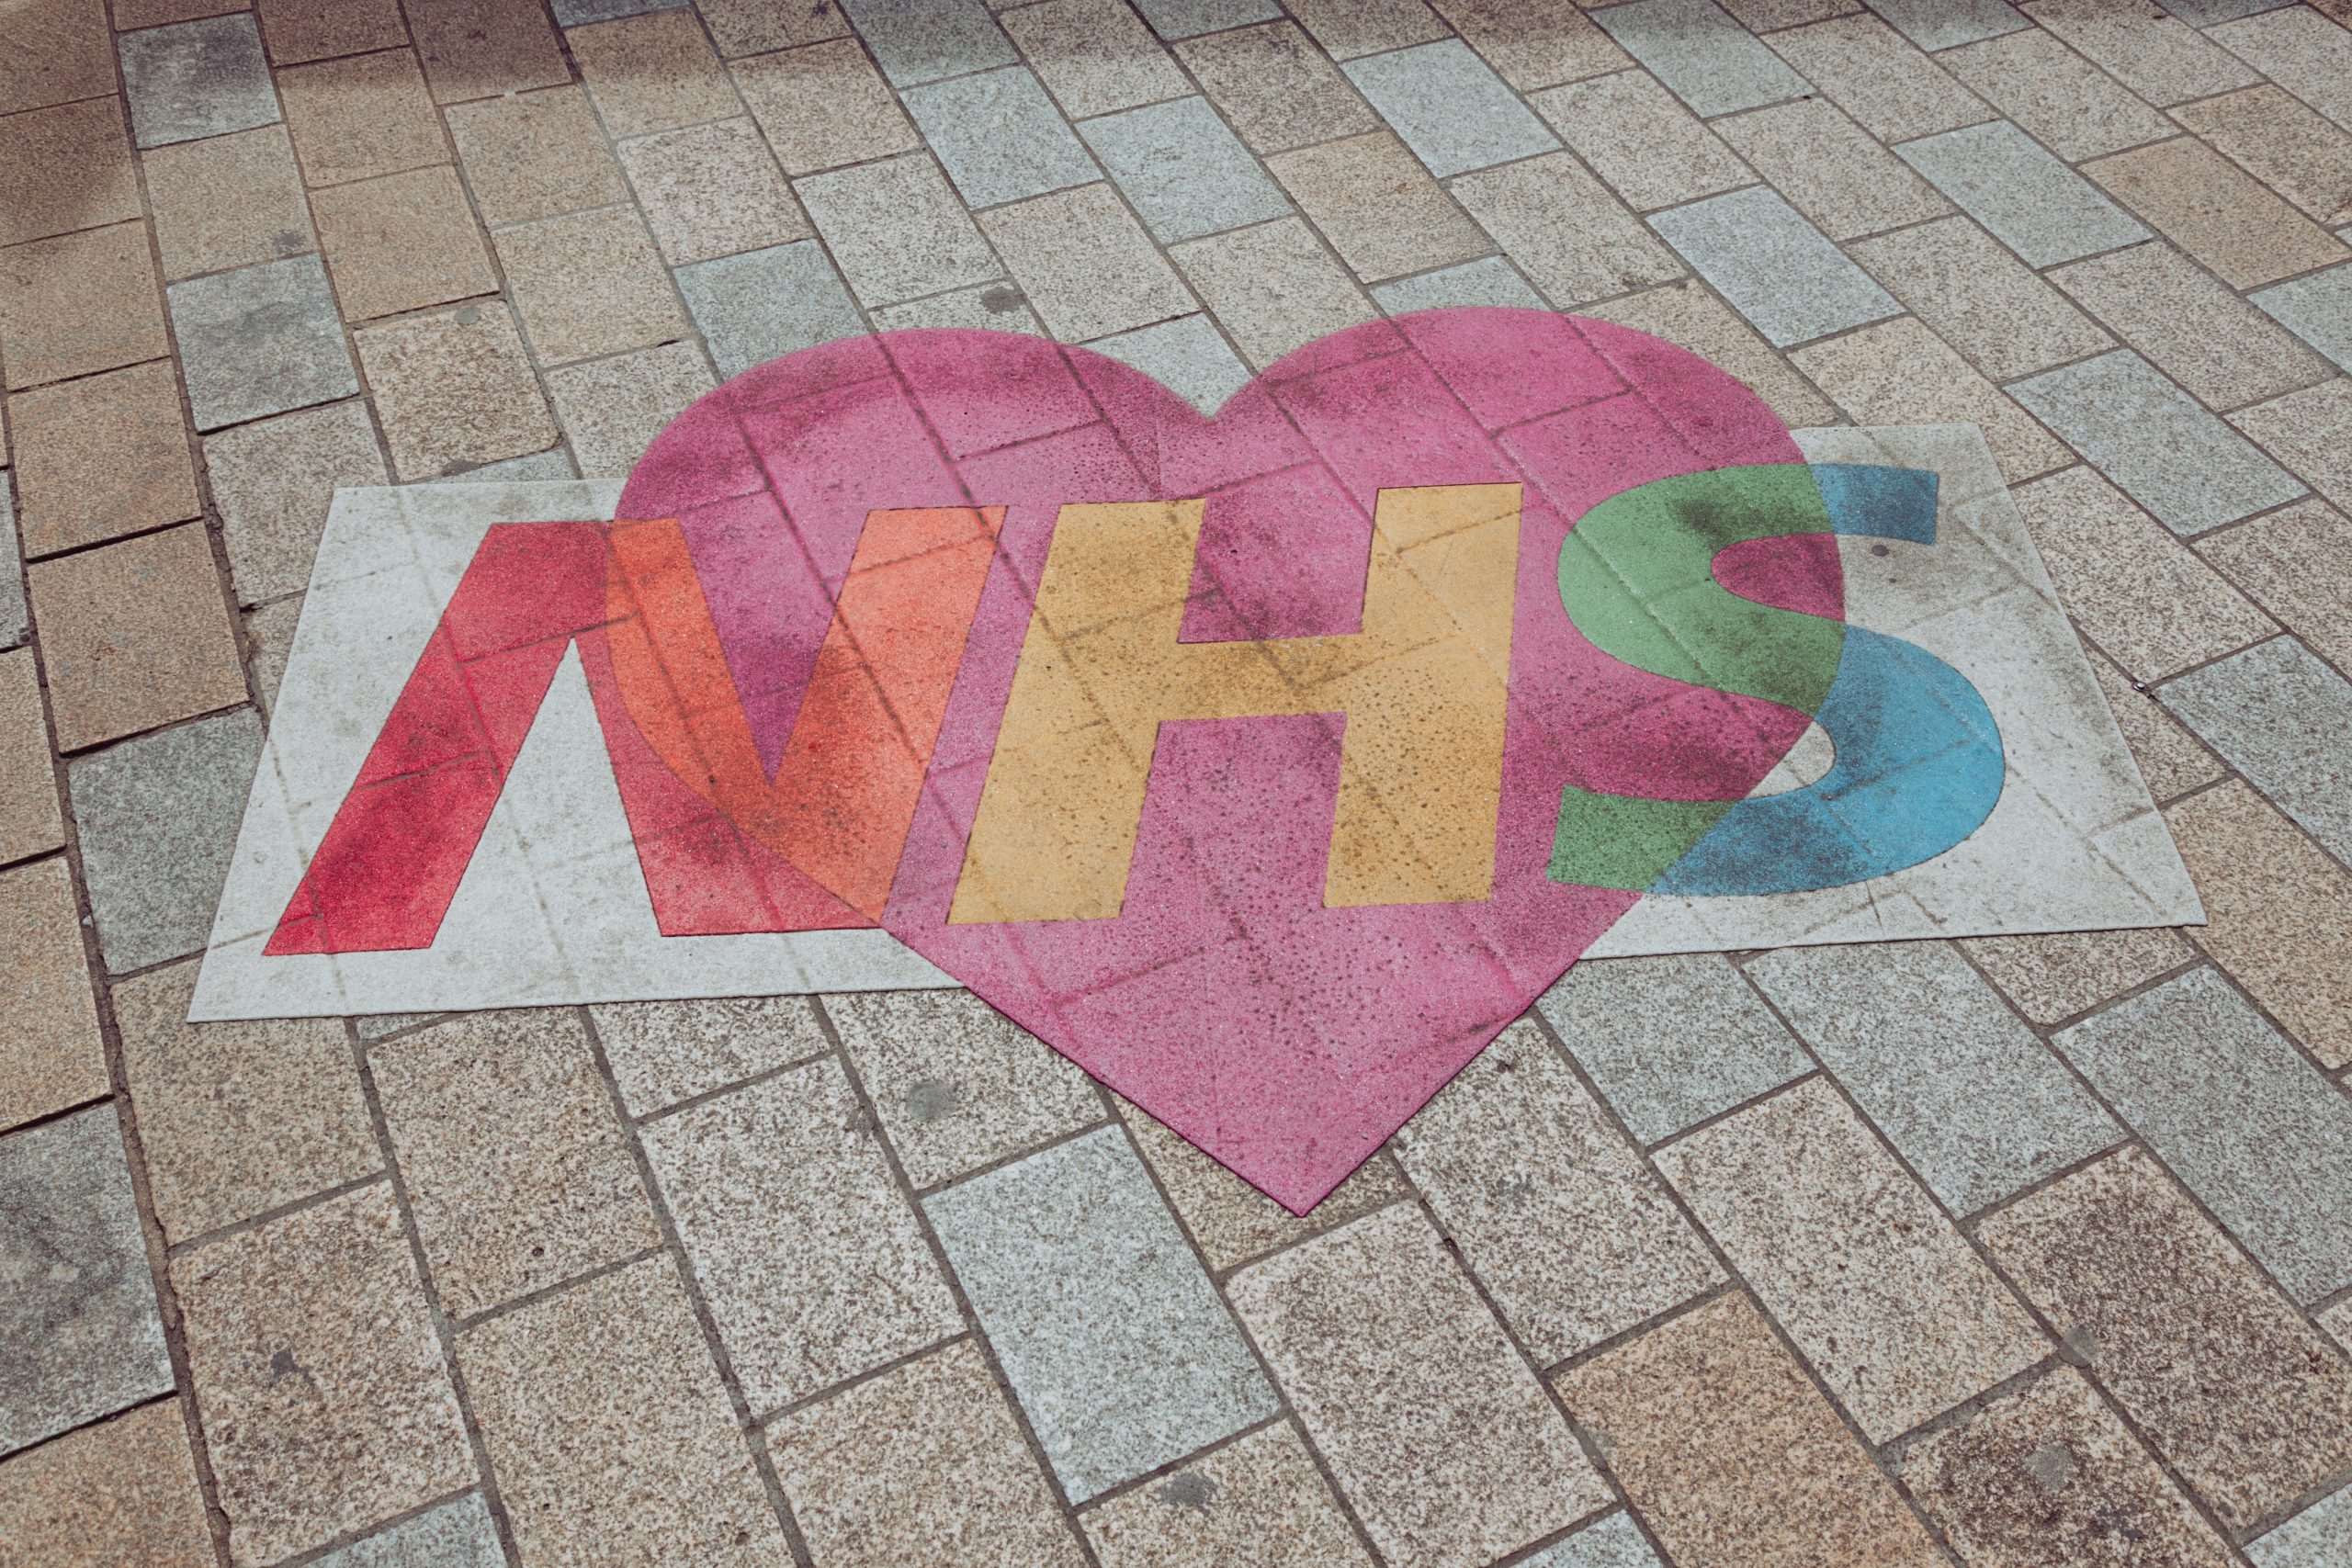 A chalk painting on the ground shows the NHS logo in rainbow colours